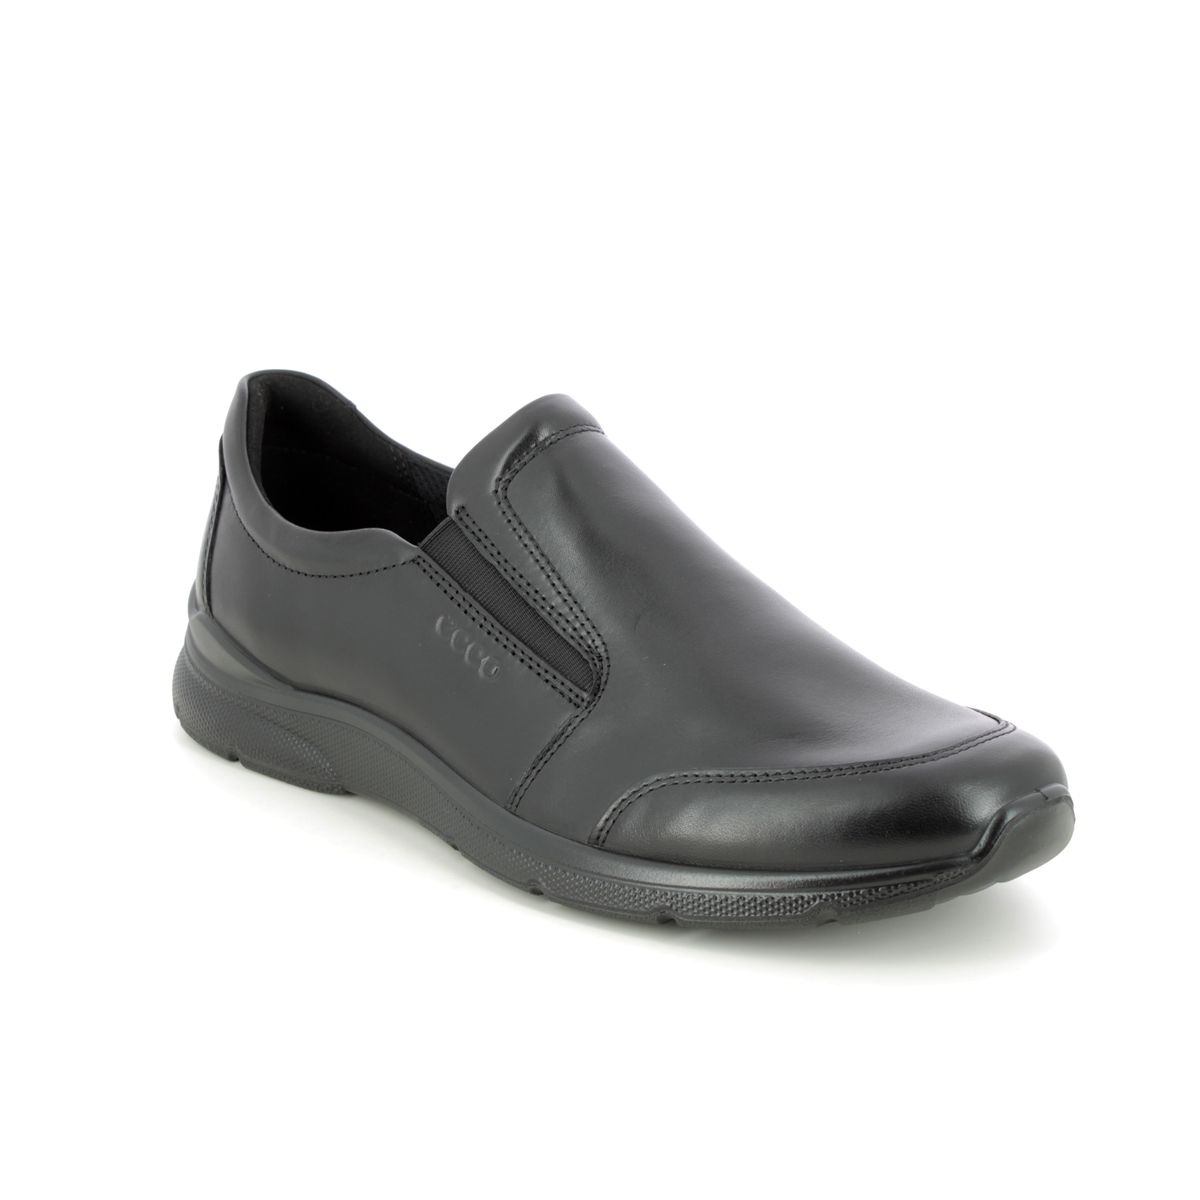 Ecco Irving Slip-On Black Leather Mens Slip-On Shoes 511684-11001 In Size 43 In Plain Black Leather